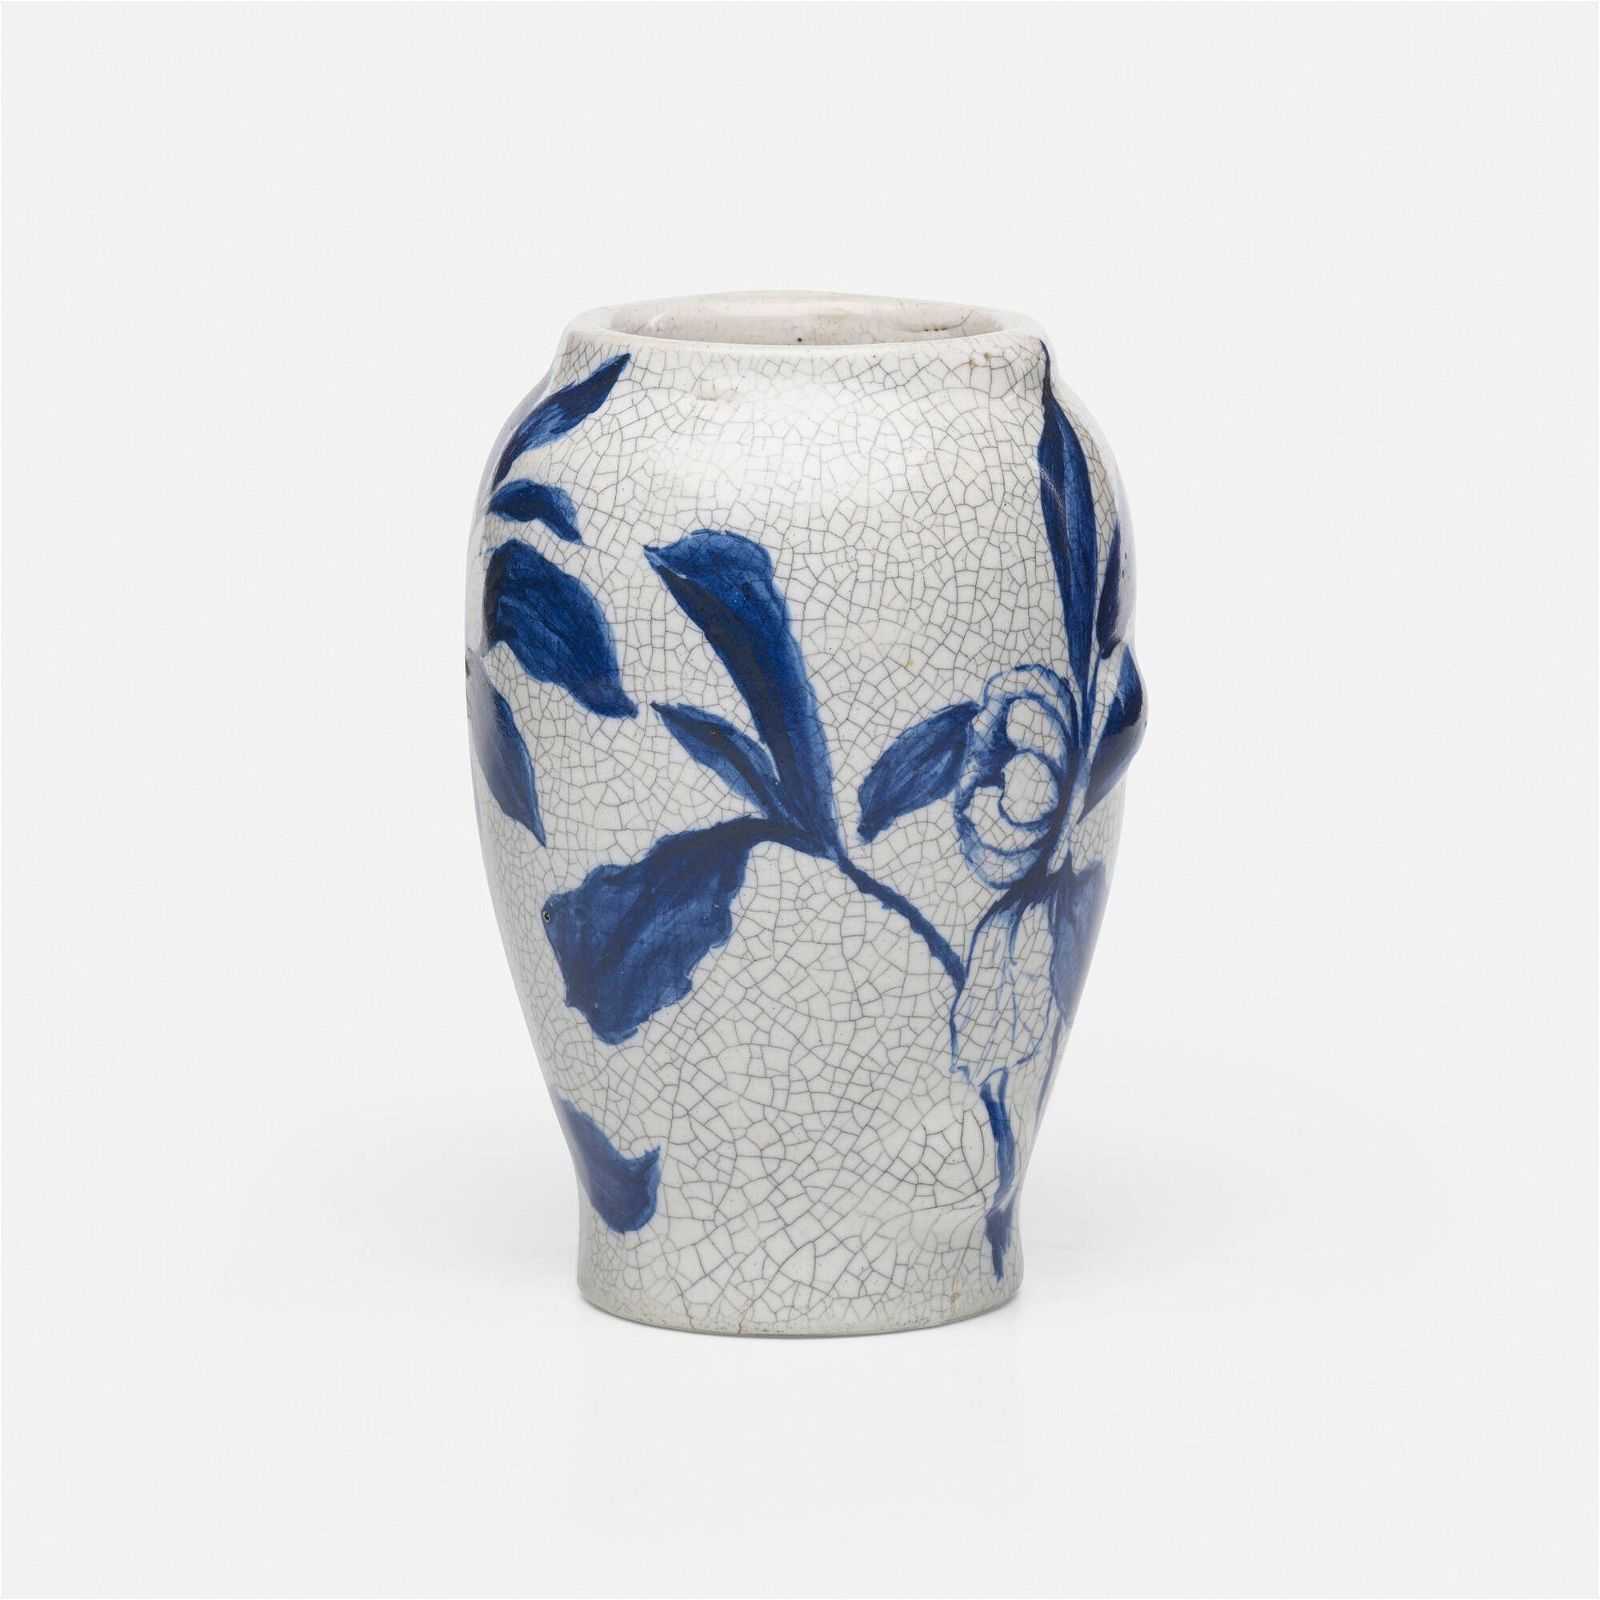 Another view of the Hugh Robertson for Dedham Pottery Magnolia vase that achieved $14,000 plus the buyer’s premium in September 2023. Image courtesy of Rago Arts and Auction Center and LiveAuctioneers.